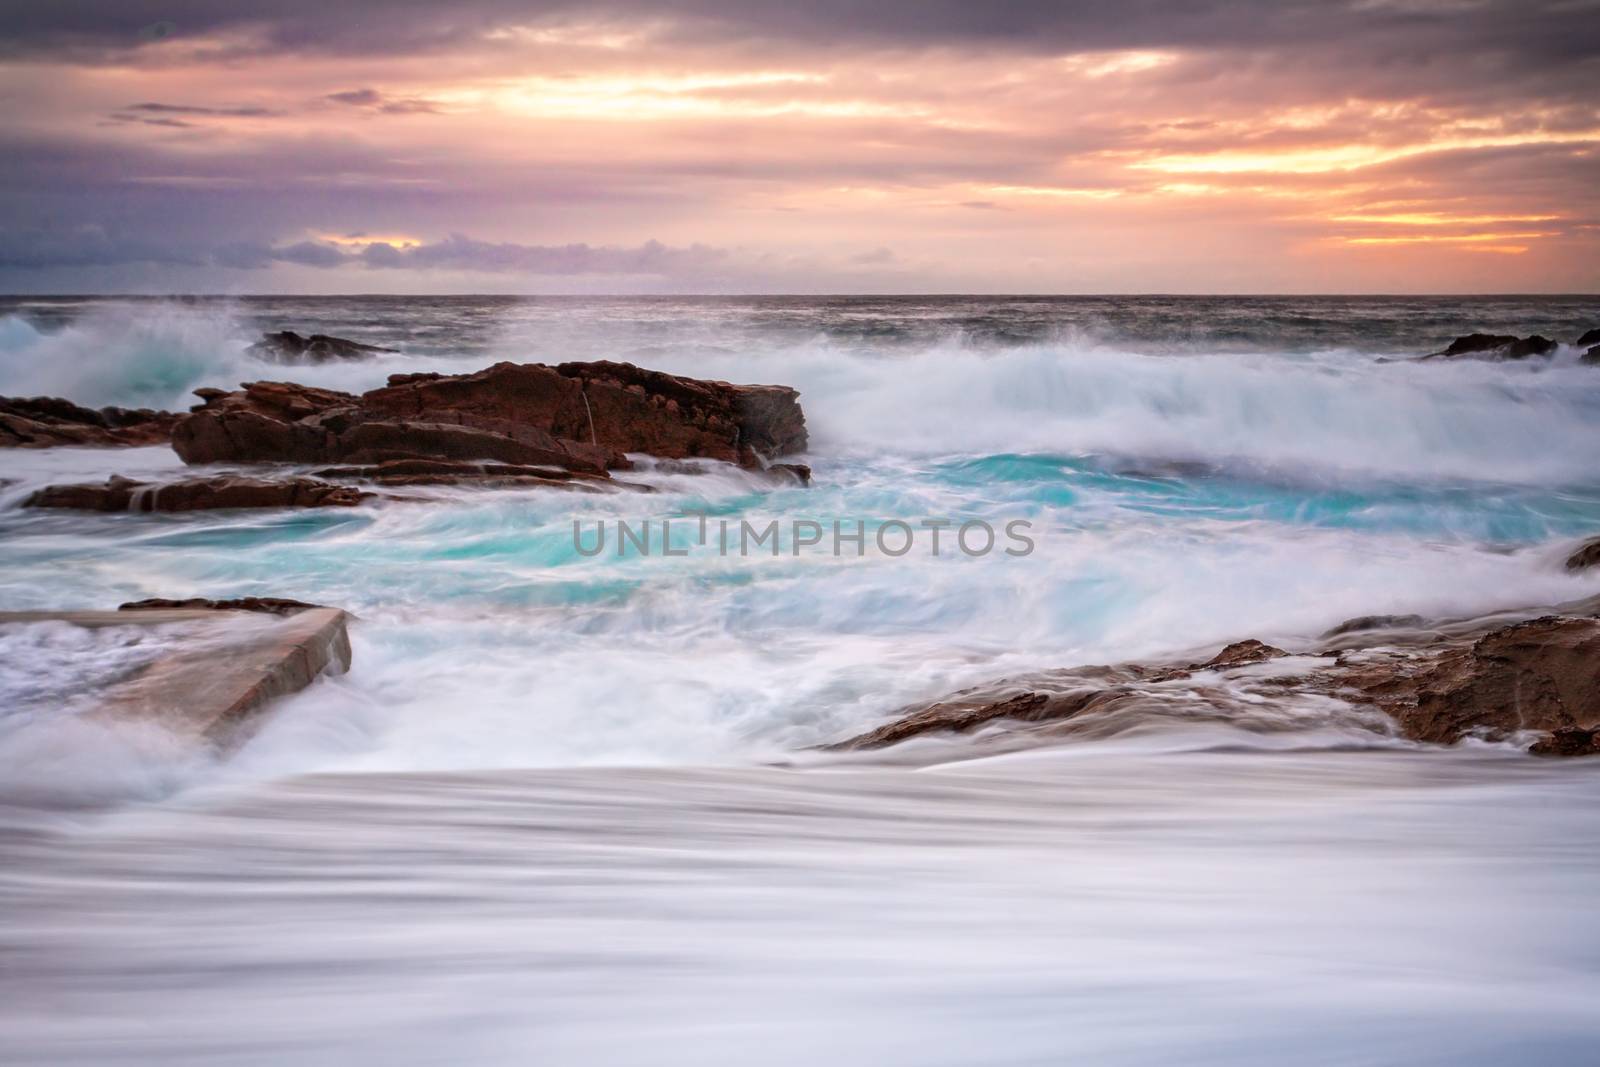 Large swell brings in big waves that create fast flowing overflows at the ocean rock pool. The glow of the morning sun as it trys to break free of through the clouds